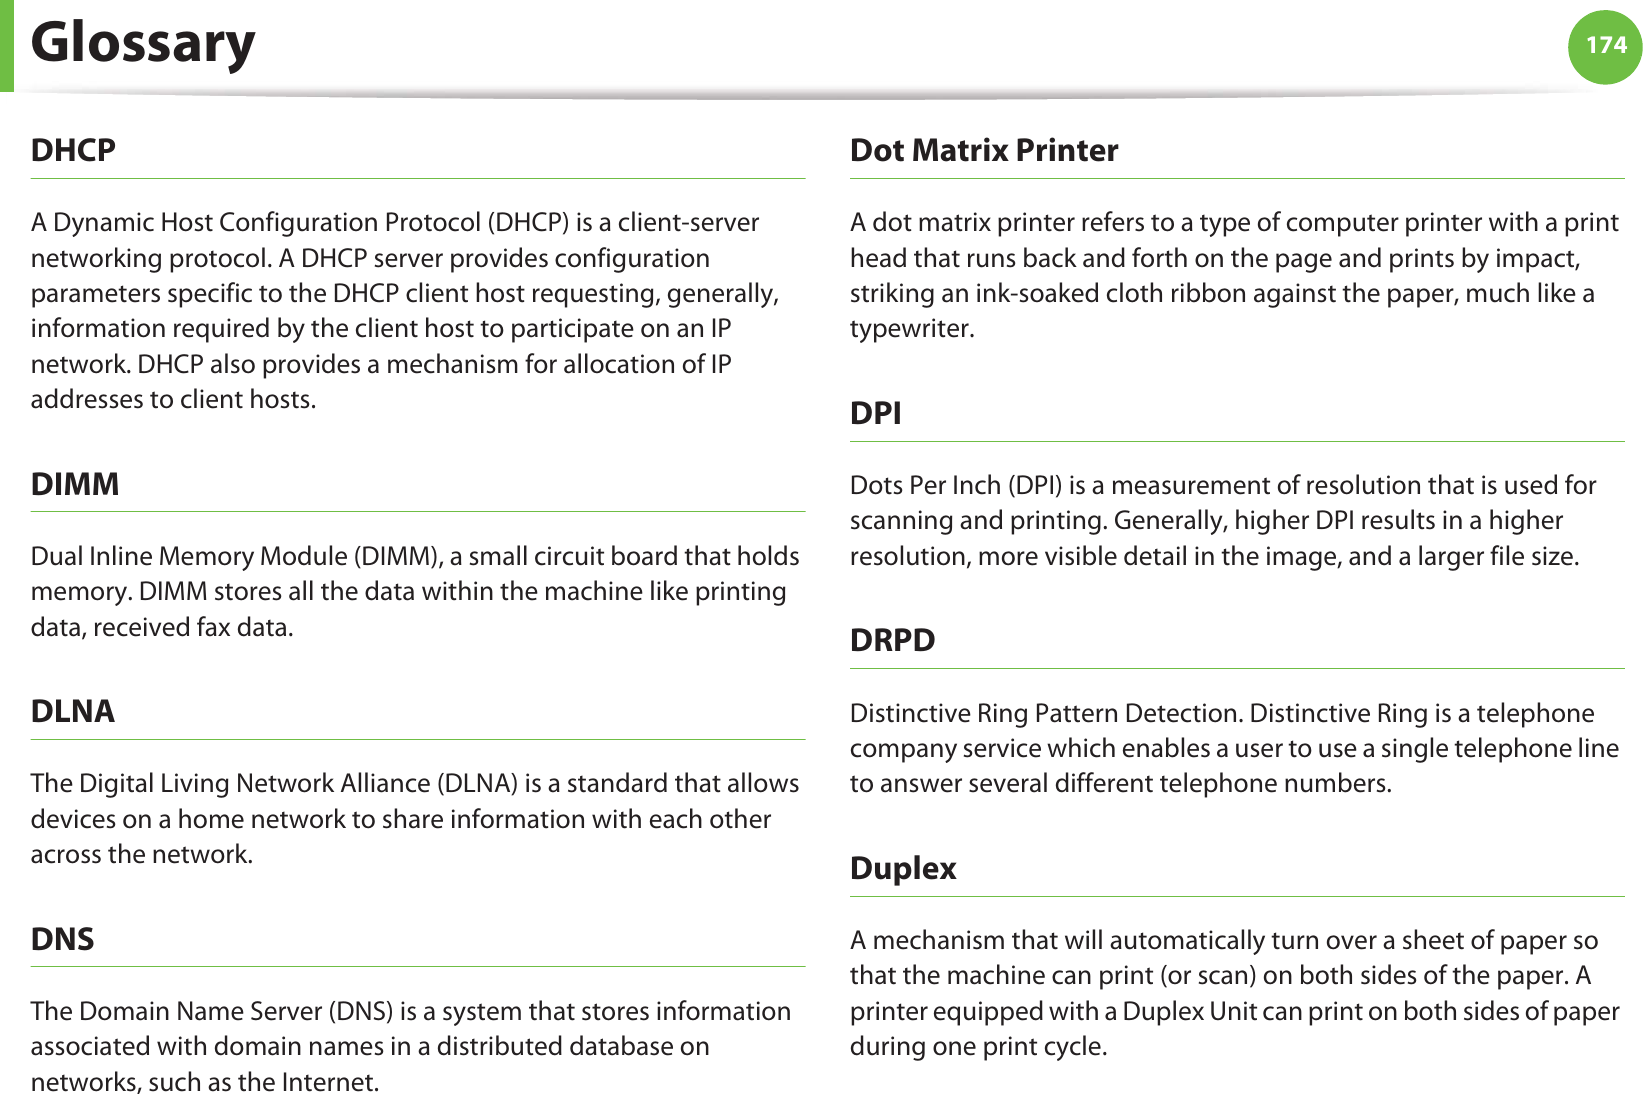 Glossary 174DHCPA Dynamic Host Configuration Protocol (DHCP) is a client-server networking protocol. A DHCP server provides configuration parameters specific to the DHCP client host requesting, generally, information required by the client host to participate on an IP network. DHCP also provides a mechanism for allocation of IP addresses to client hosts.DIMMDual Inline Memory Module (DIMM), a small circuit board that holds memory. DIMM stores all the data within the machine like printing data, received fax data.DLNAThe Digital Living Network Alliance (DLNA) is a standard that allows devices on a home network to share information with each other across the network.DNSThe Domain Name Server (DNS) is a system that stores information associated with domain names in a distributed database on networks, such as the Internet.Dot Matrix PrinterA dot matrix printer refers to a type of computer printer with a print head that runs back and forth on the page and prints by impact, striking an ink-soaked cloth ribbon against the paper, much like a typewriter.DPIDots Per Inch (DPI) is a measurement of resolution that is used for scanning and printing. Generally, higher DPI results in a higher resolution, more visible detail in the image, and a larger file size.DRPD Distinctive Ring Pattern Detection. Distinctive Ring is a telephone company service which enables a user to use a single telephone line to answer several different telephone numbers.DuplexA mechanism that will automatically turn over a sheet of paper so that the machine can print (or scan) on both sides of the paper. A printer equipped with a Duplex Unit can print on both sides of paper during one print cycle.